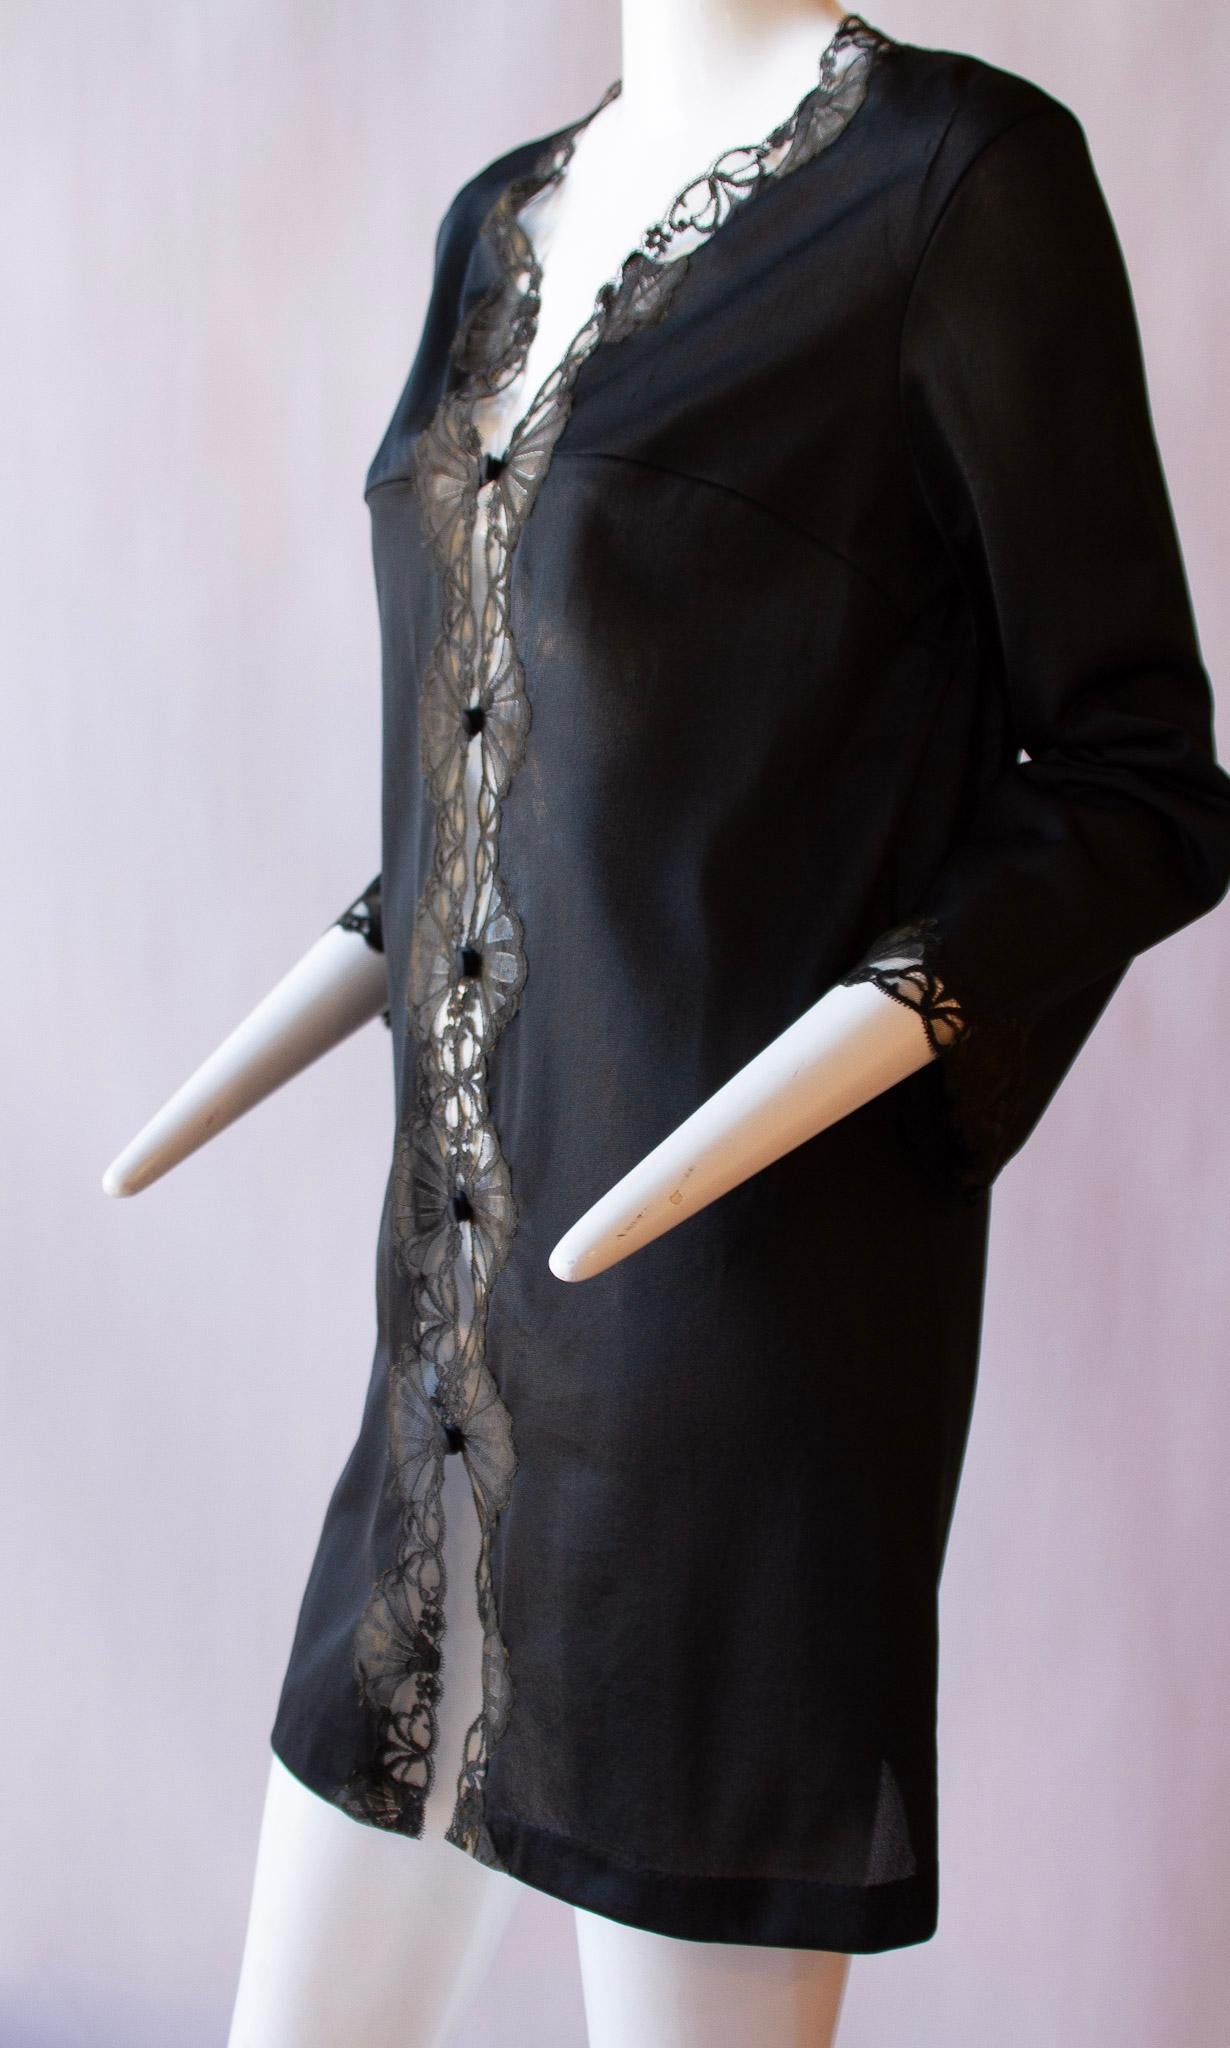 EMILIO PUCCI for Formfit Rogers, Mid-Length Black Silk Button Robe with Scalloped Laced Edges, circa 1959-1960s

Bust 42